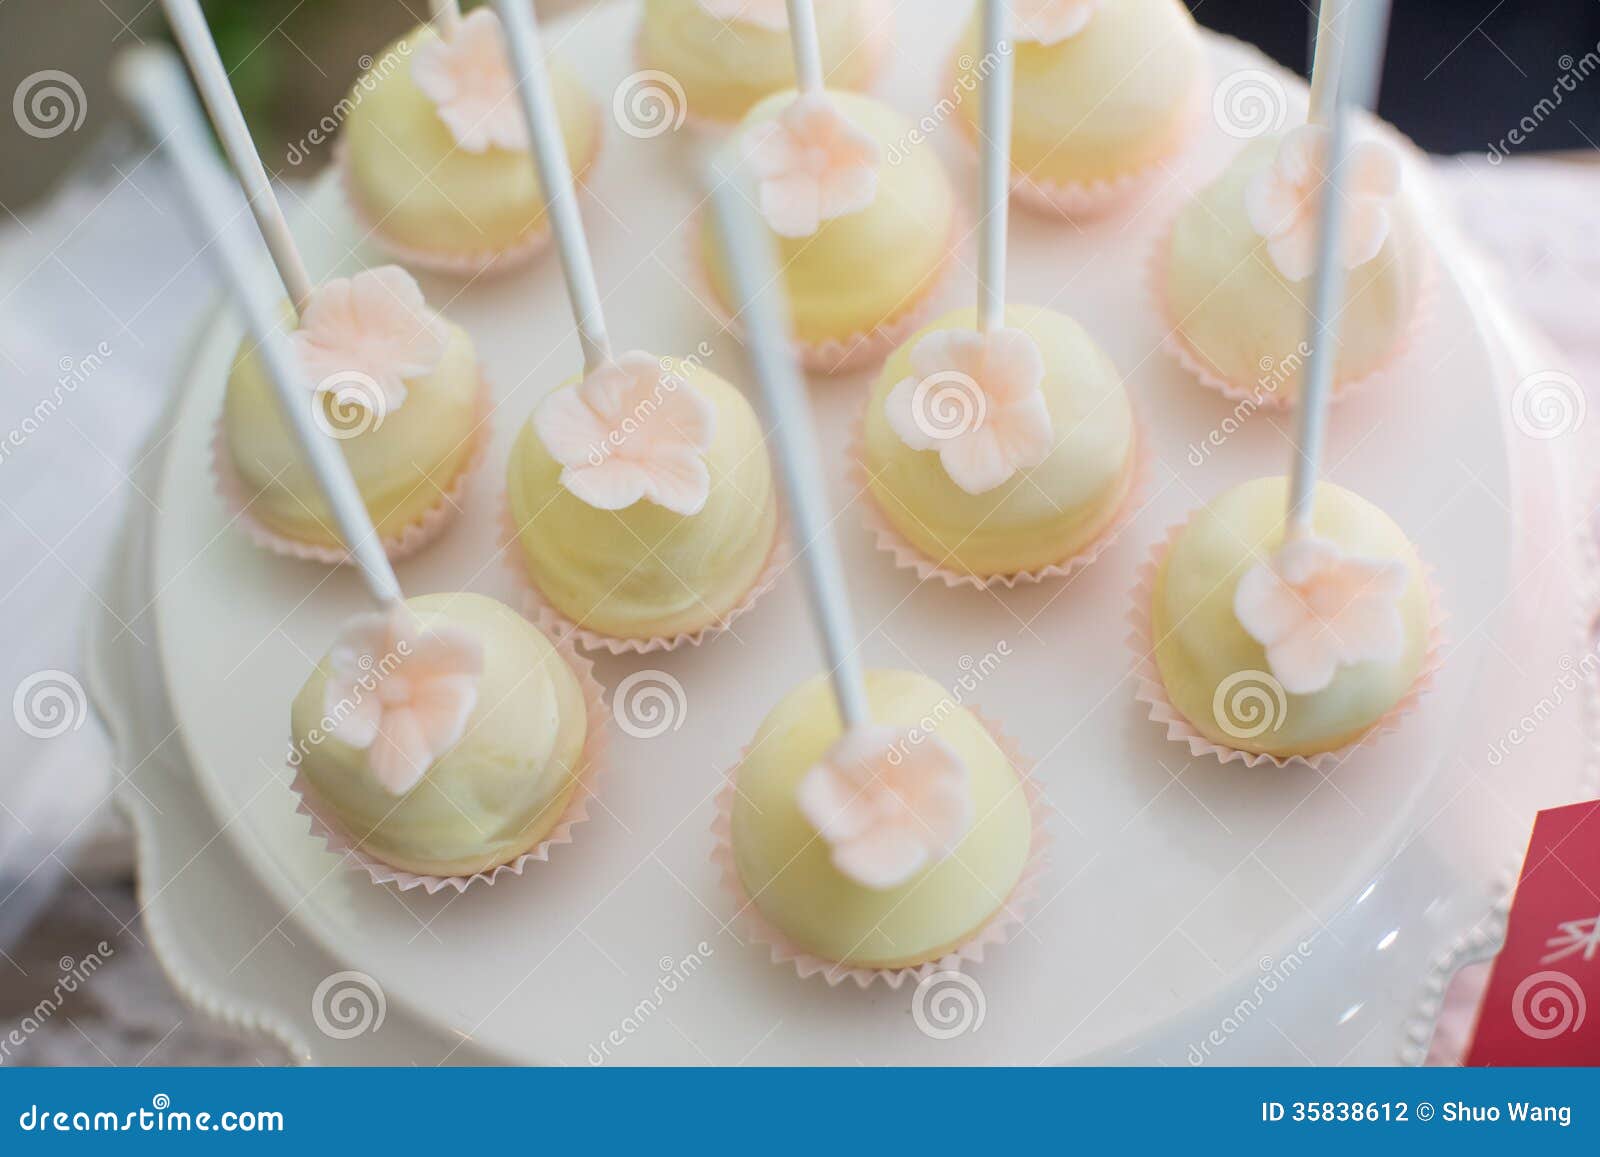 cake pops and cupcakes